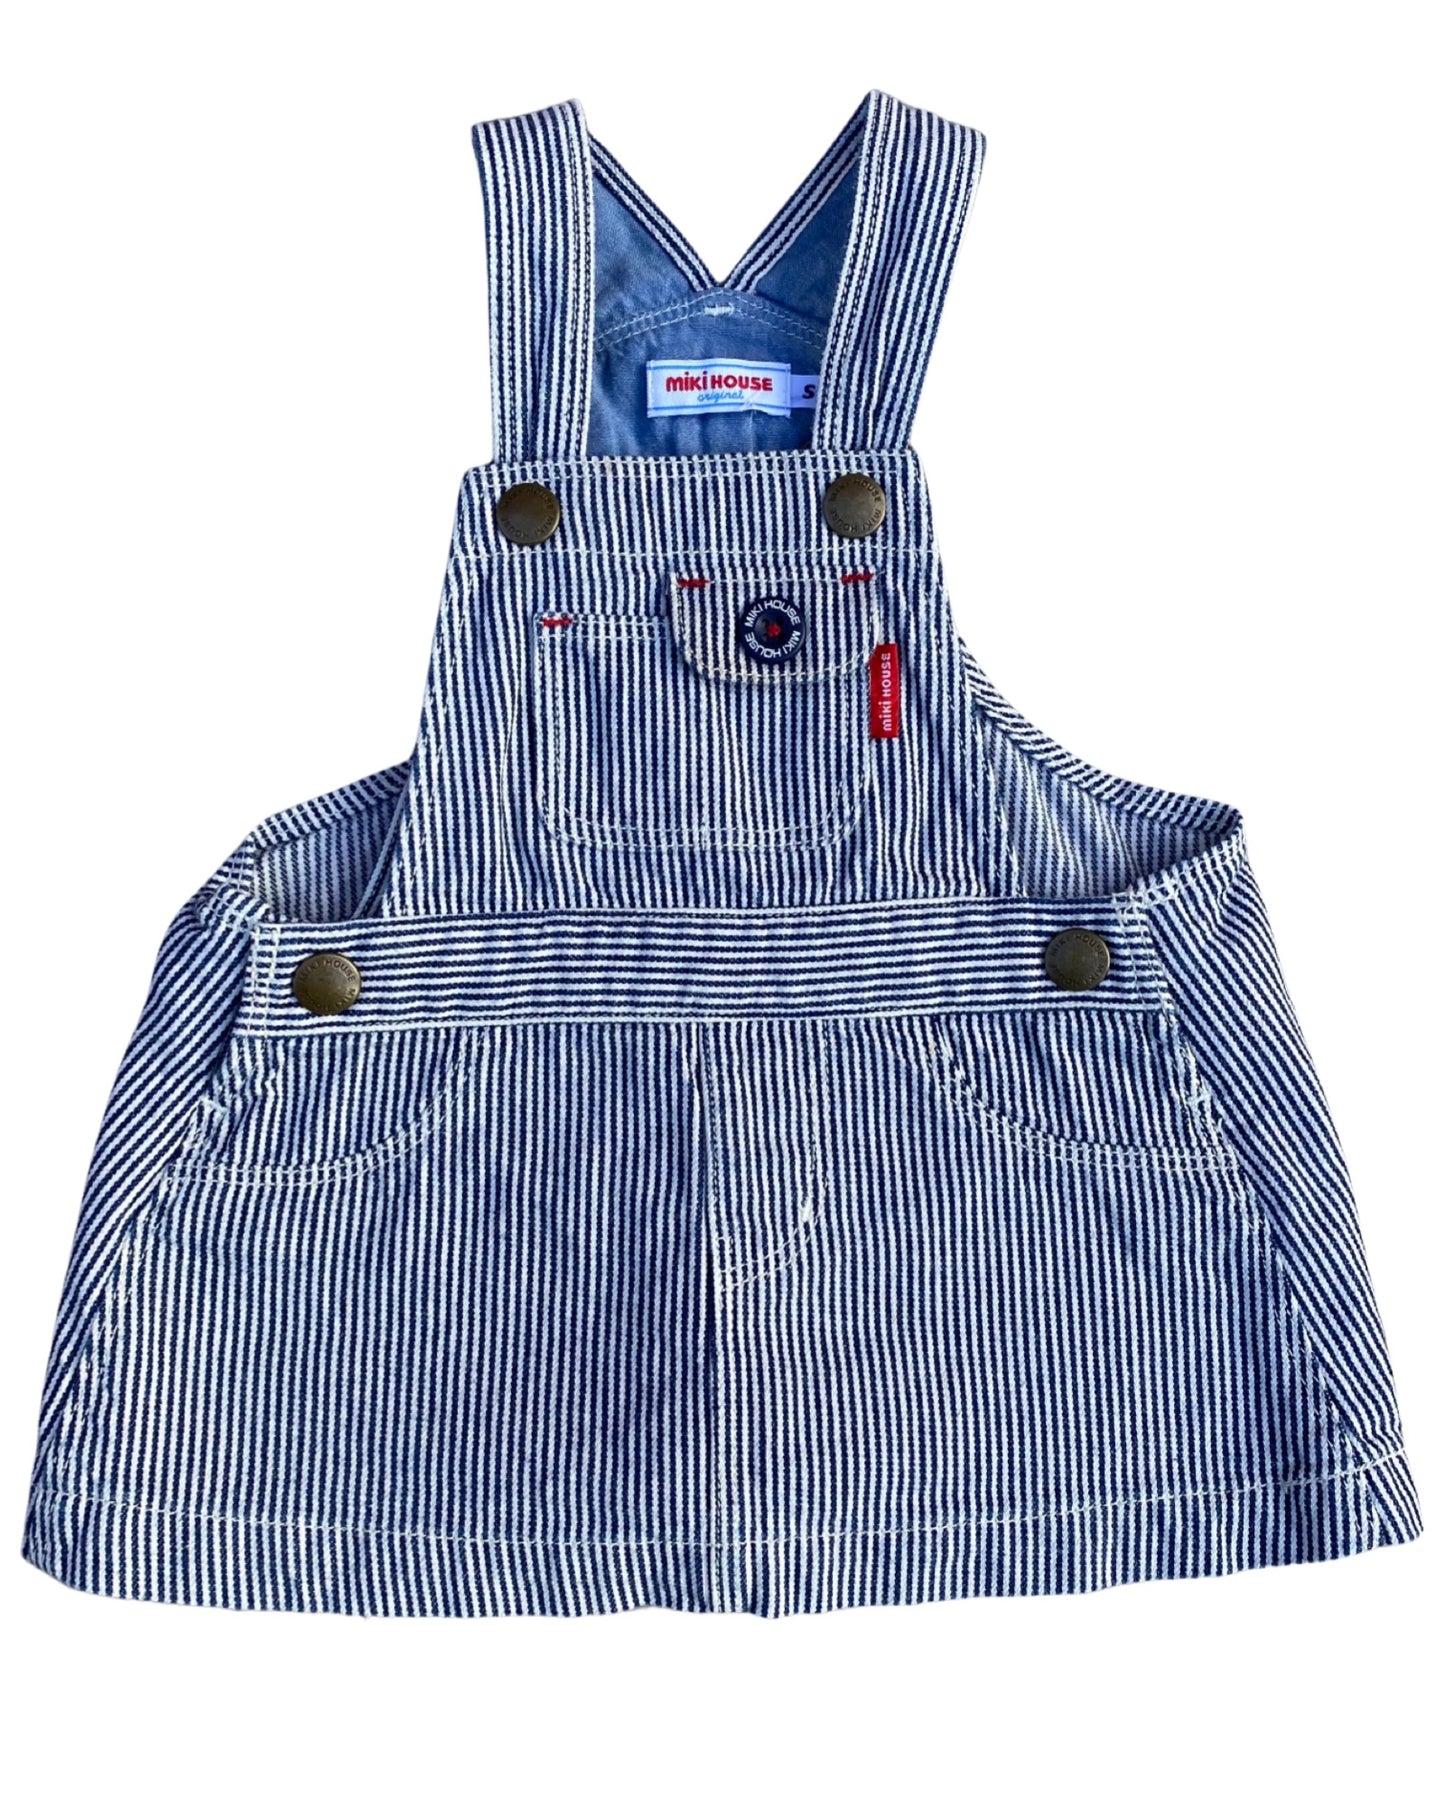 Mikihouse blue/white pinstripe dungaree dress (9-12mths)